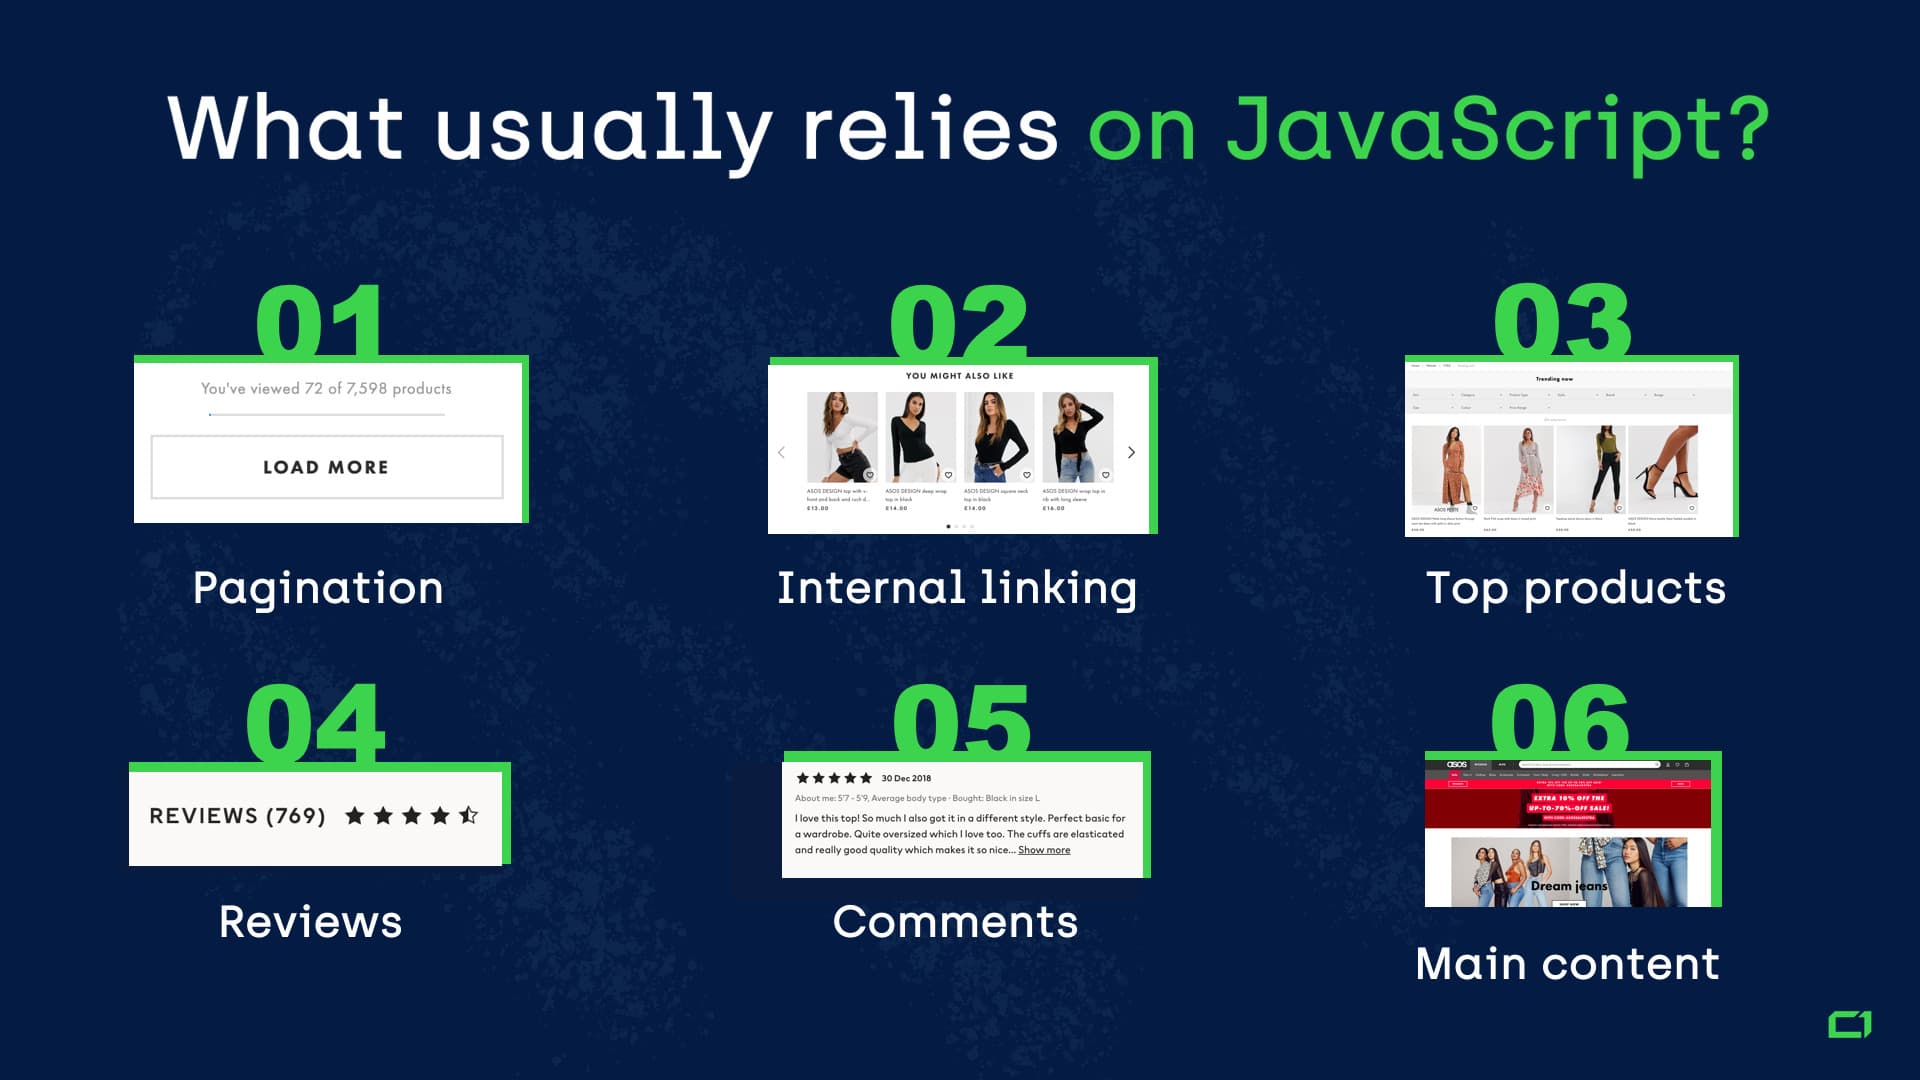 Page elements that usually rely on JavaScript are pagination, internal linking, top products, reviews, comments, main content.